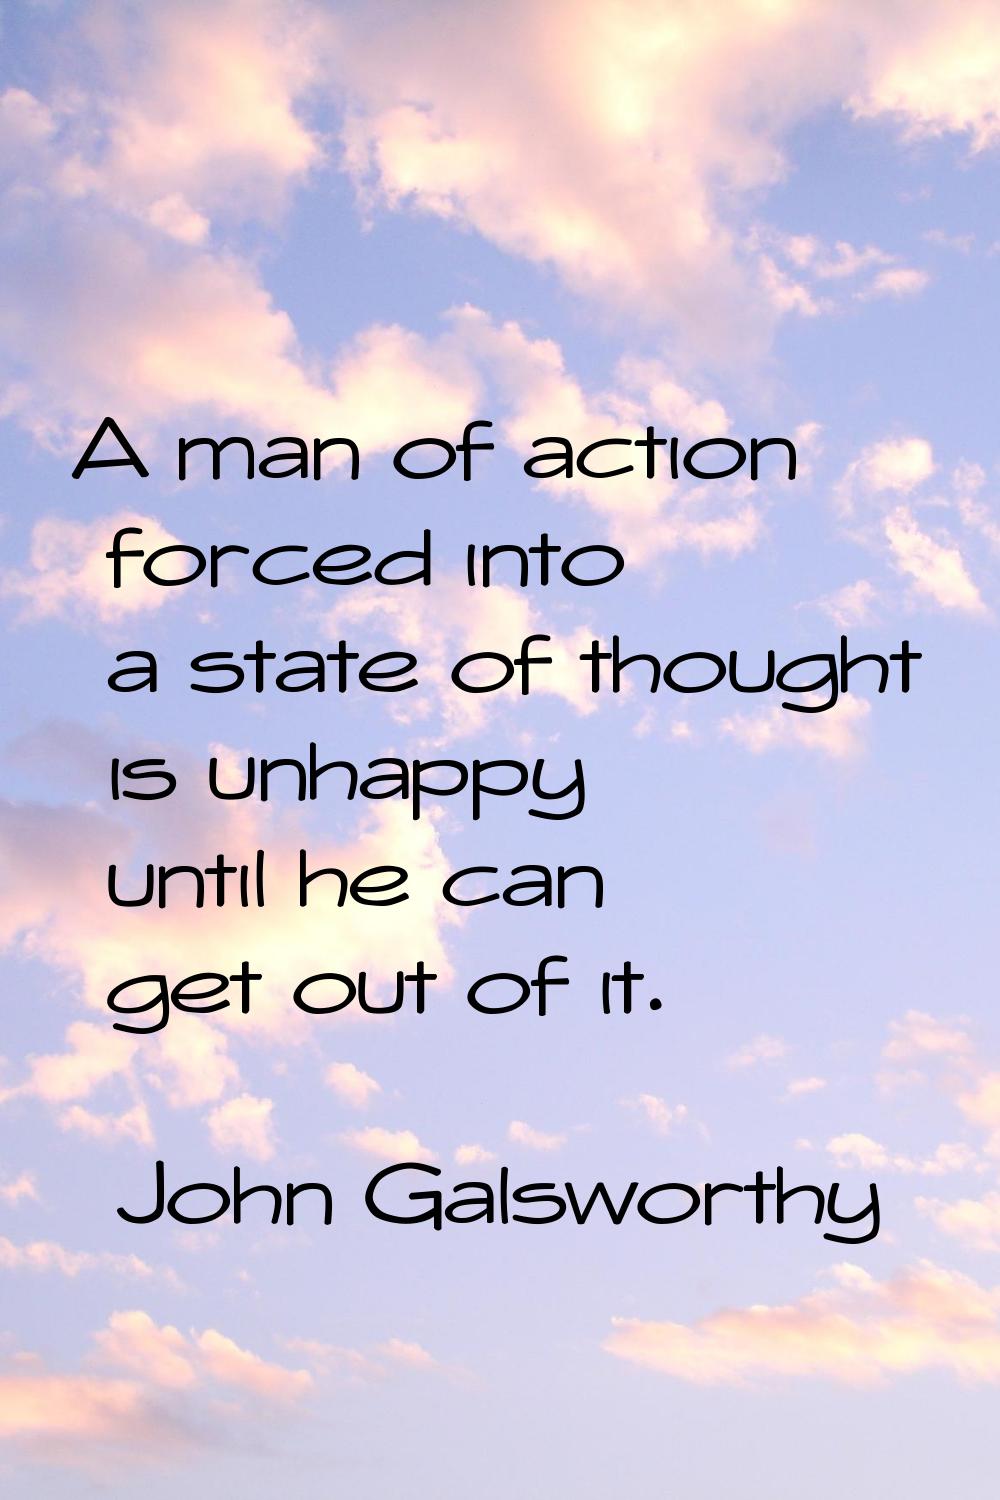 A man of action forced into a state of thought is unhappy until he can get out of it.